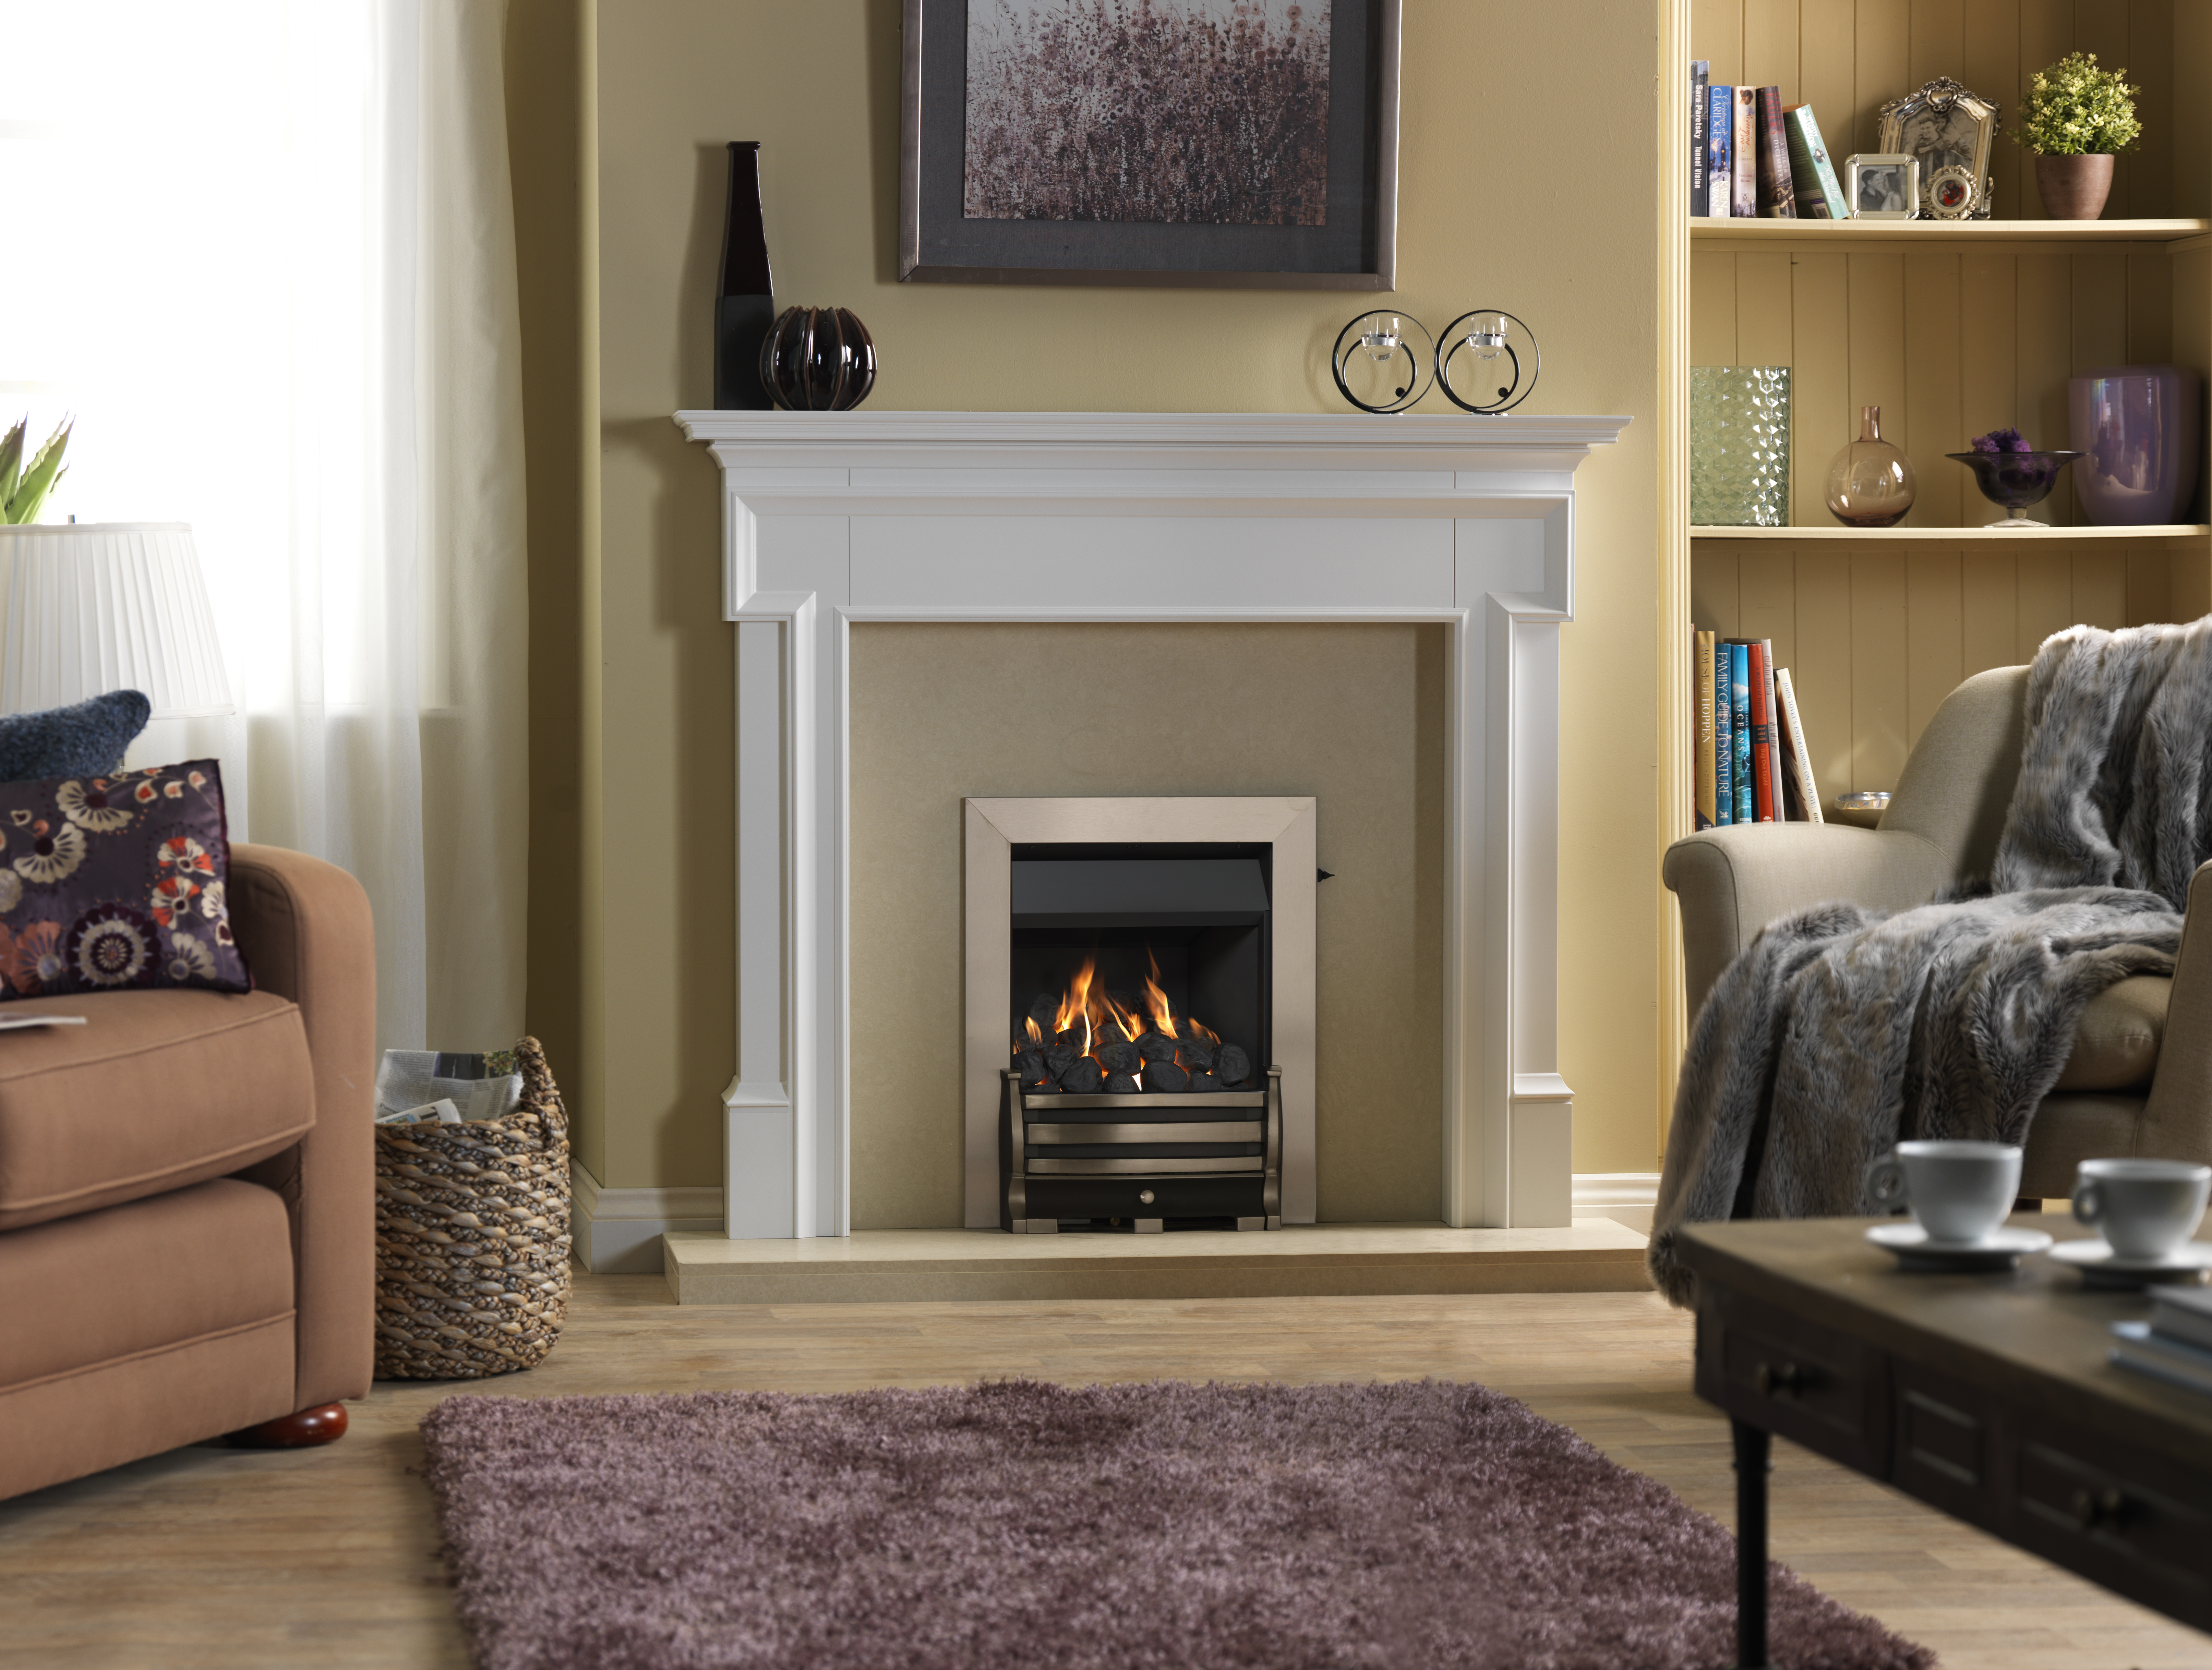 Updating An Old Gas Fire, How To Upgrade A Gas Fireplace